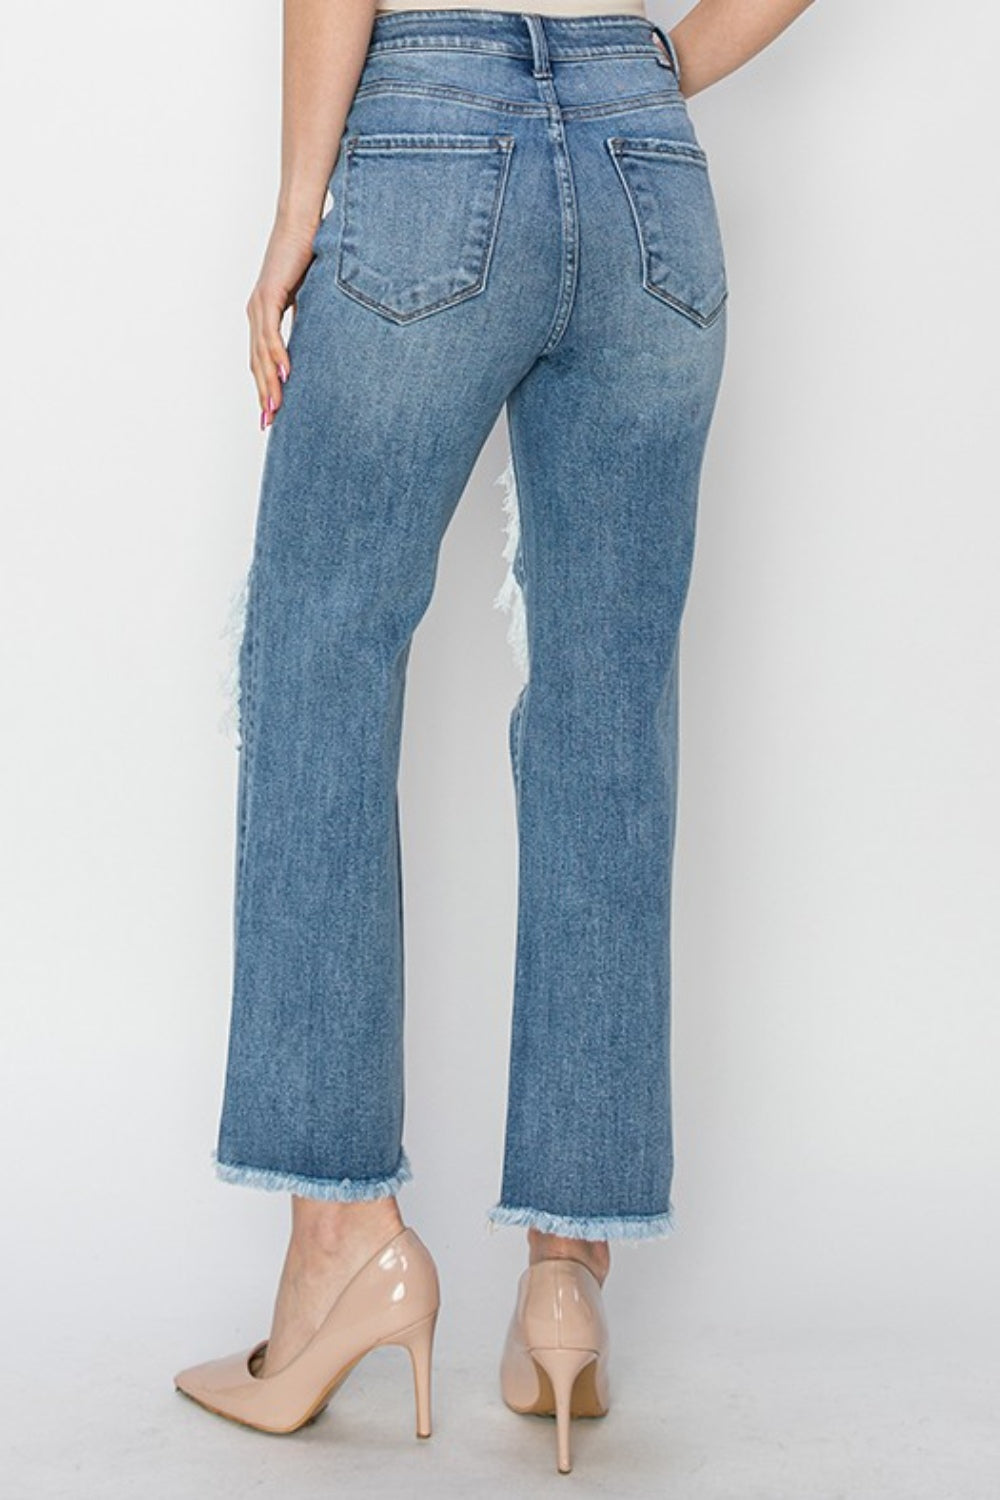 ONLINE ONLY! RISEN High Rise Distressed Crop Straight Jeans